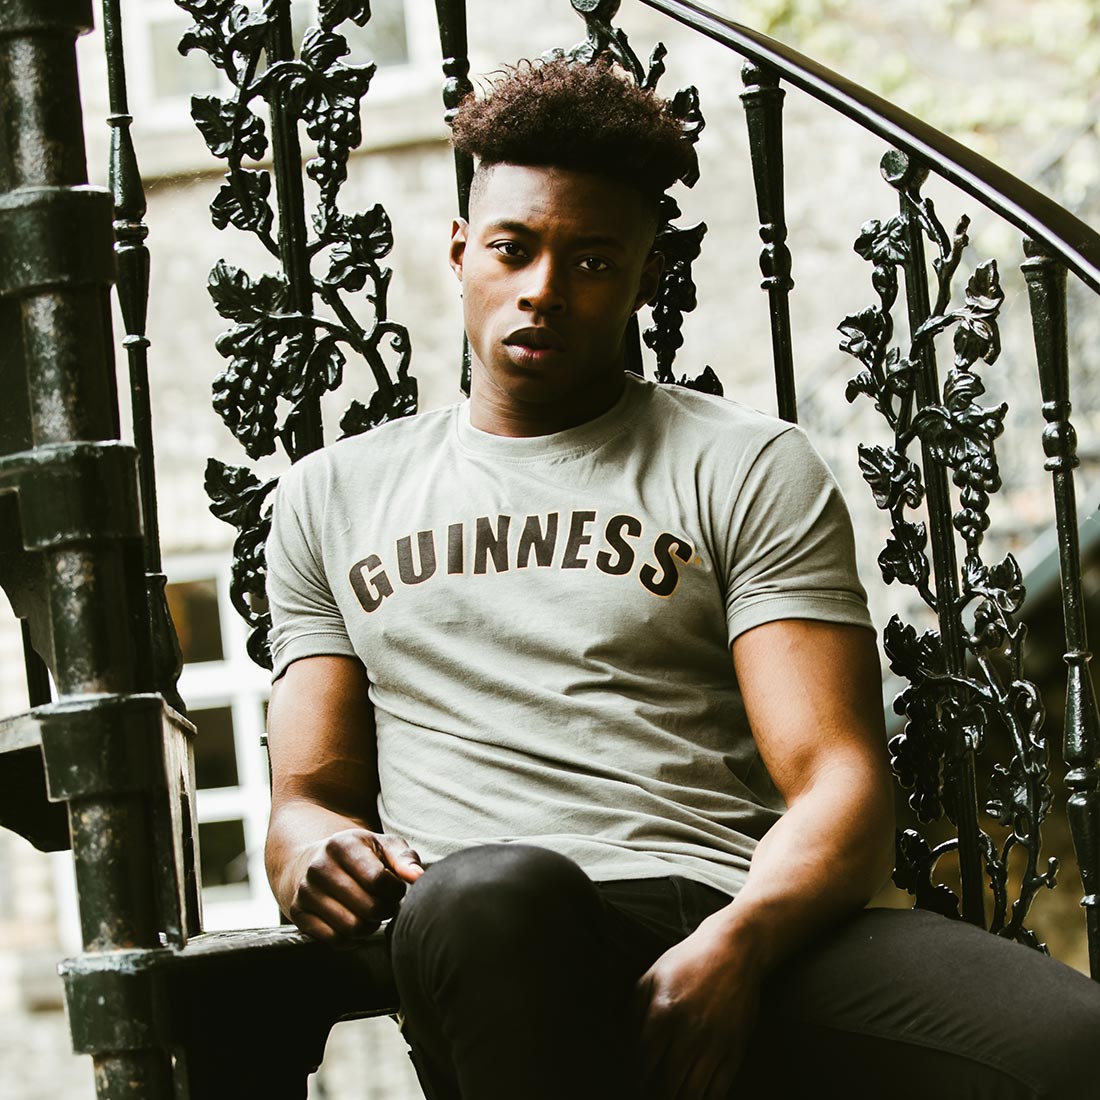 A man wearing a grey Guinness t-shirt, also known as the Green Heathered Bottle Cap Tee, sitting on a staircase.